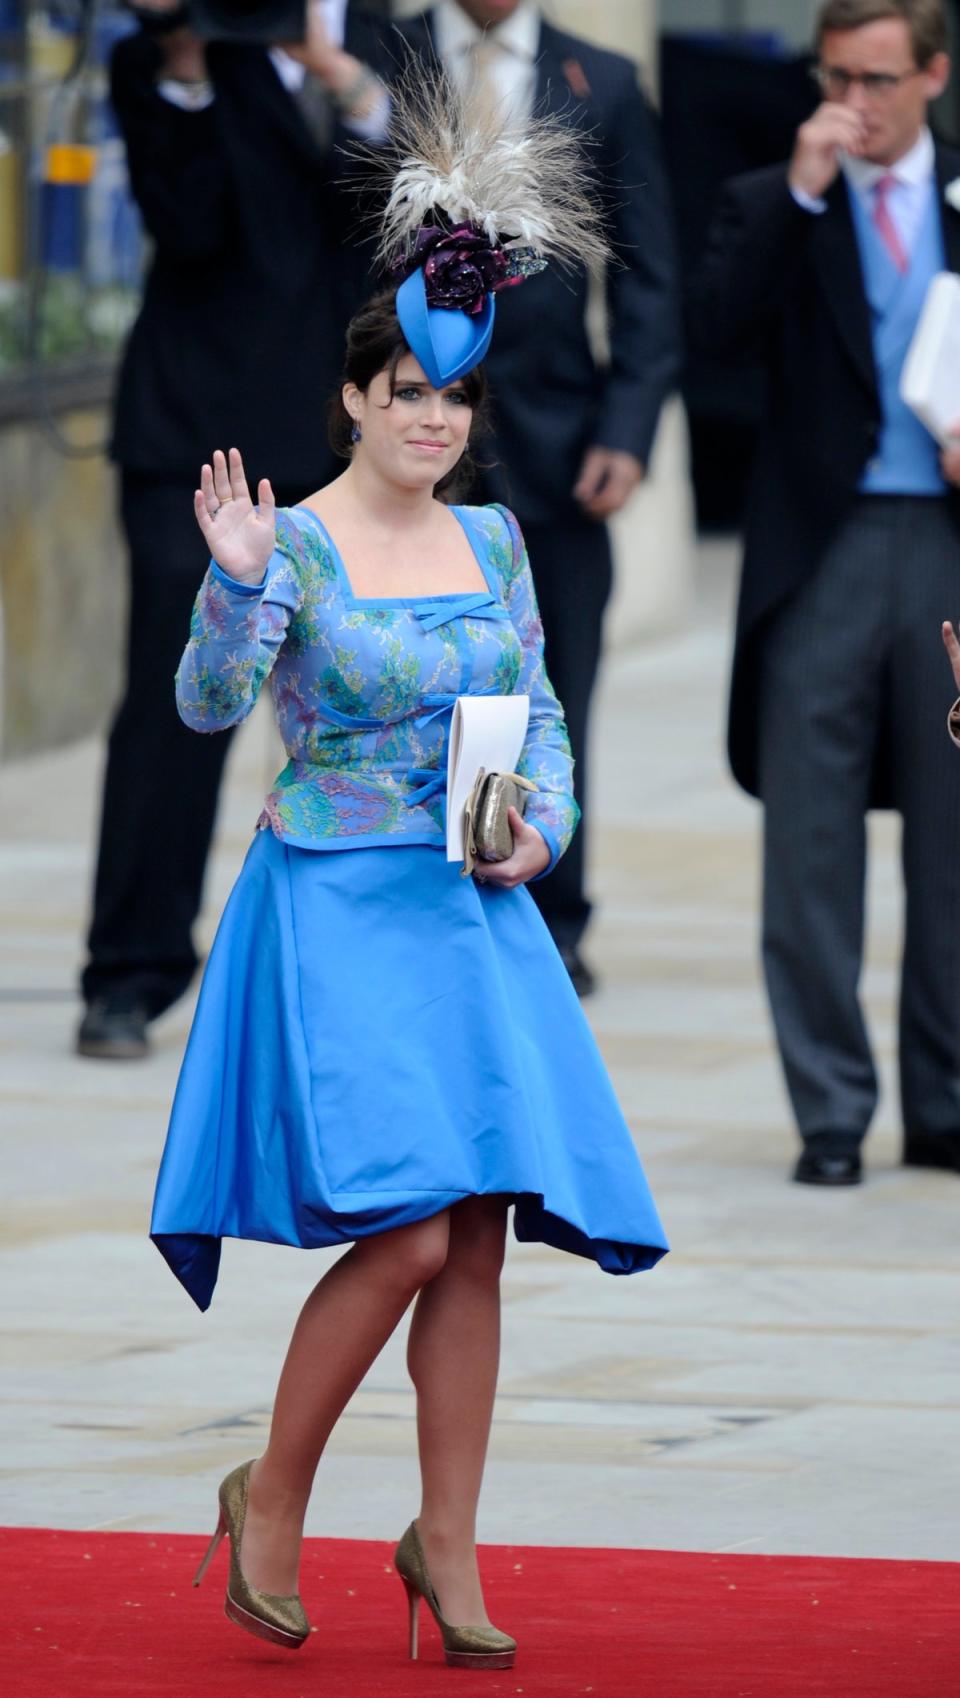 Princess Eugenie waves as she leaves Westminster Abbey in London following the wedding service of Prince William and Kate in 2011 (AFP via Getty Images)